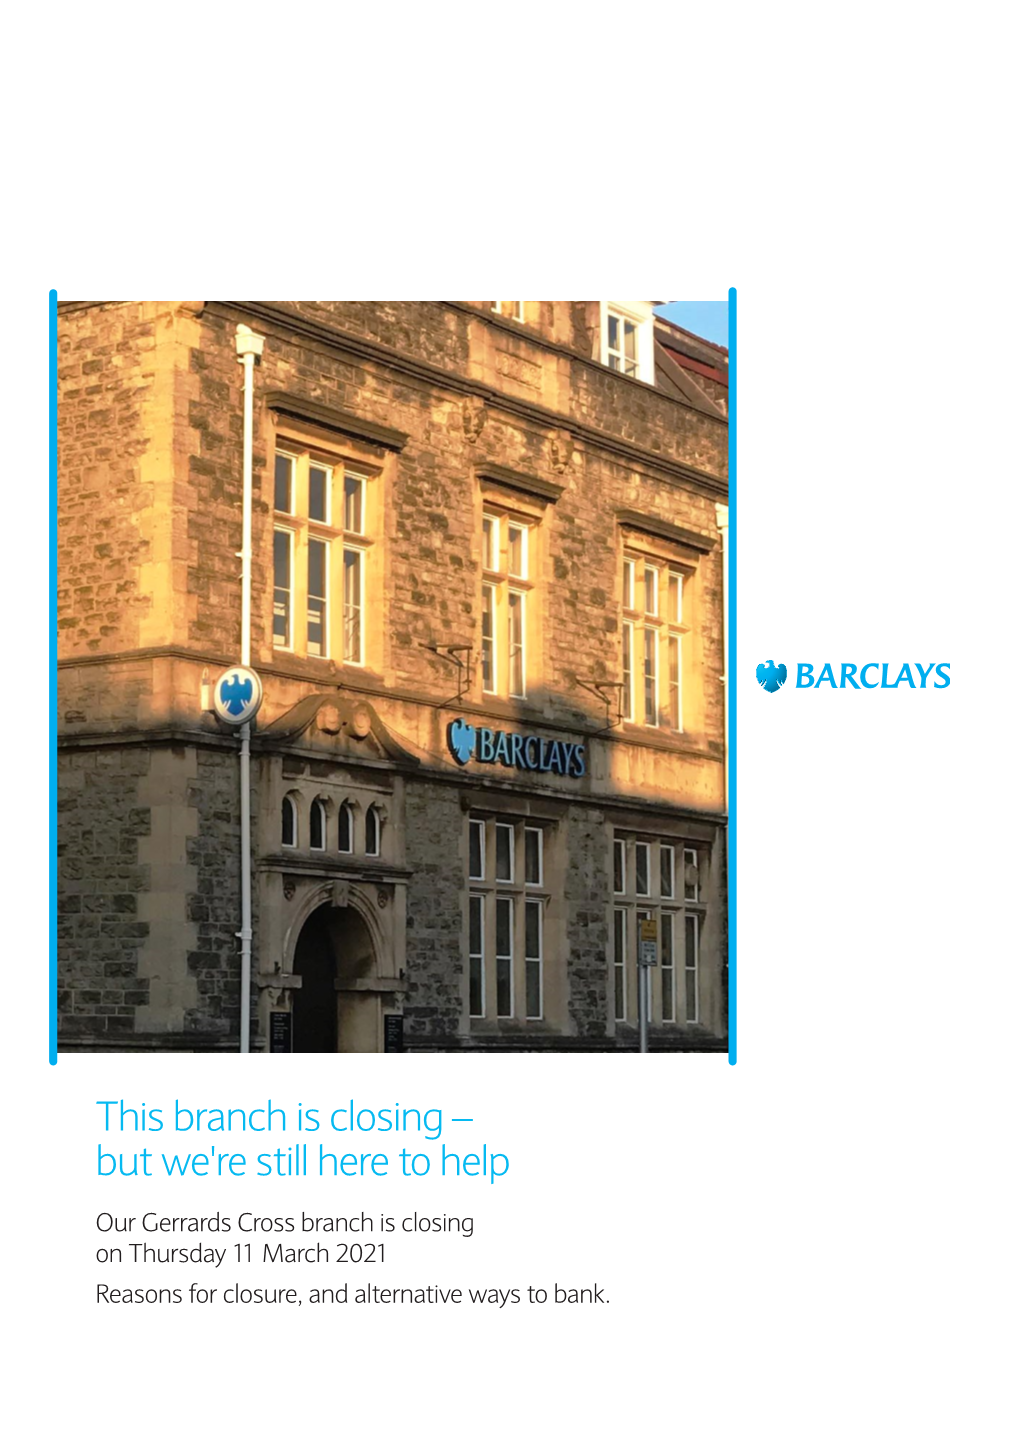 Gerrards Cross Branch Is Closing on Thursday 11 March 2021 Reasons for Closure, and Alternative Ways to Bank